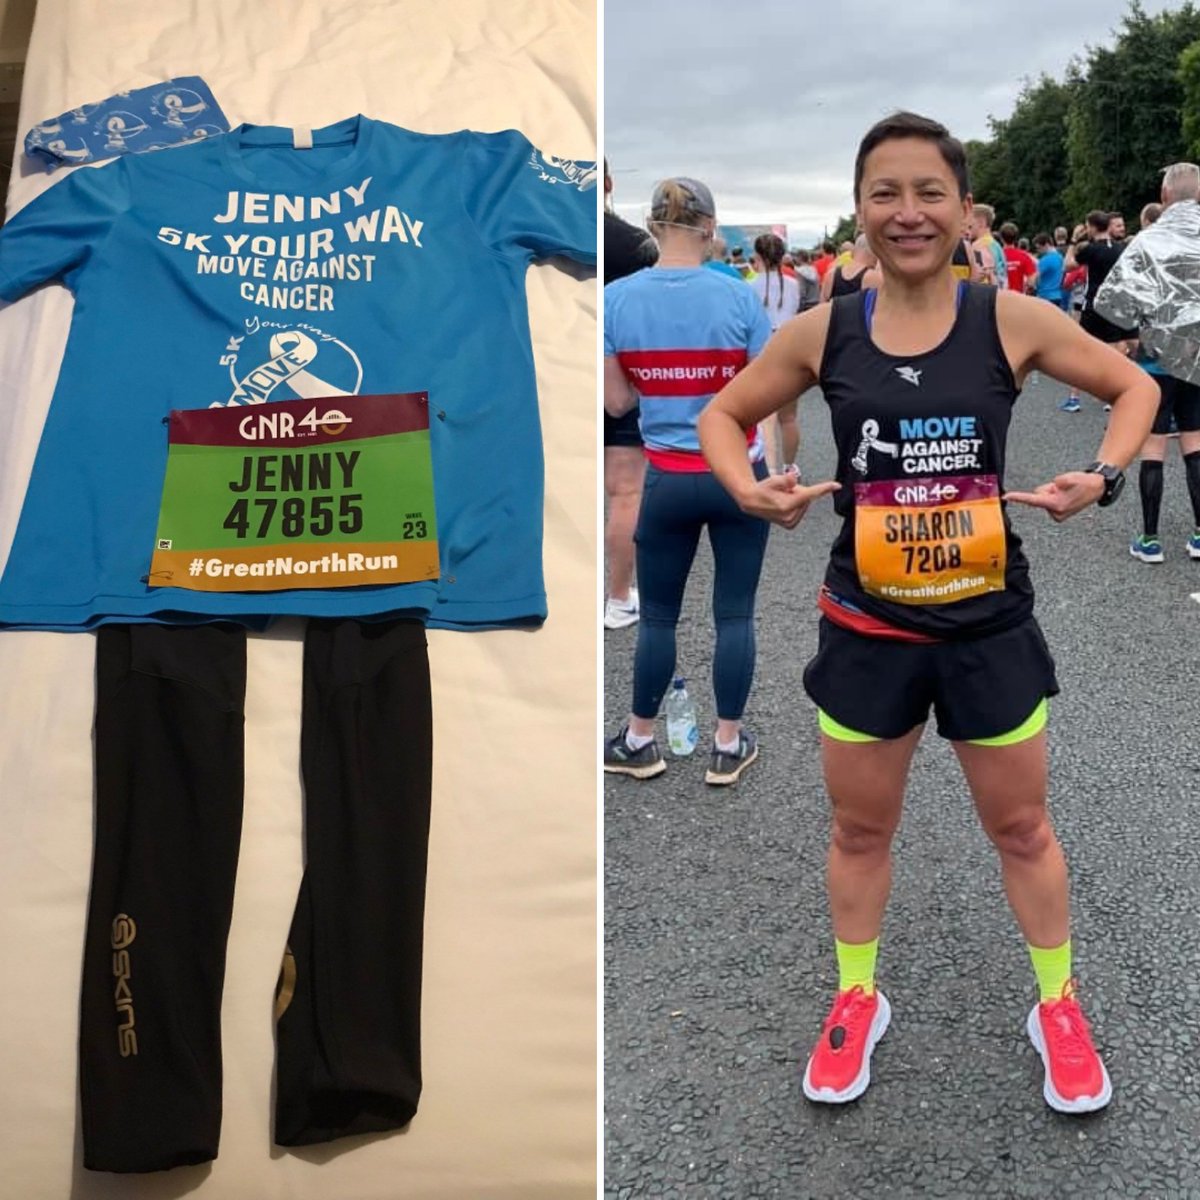 WELL DONE AND THANK YOU to all of our runners who took part in The Great North Run last weekend - you all nailed it!

Shout out to Jenny and Sharon for sending us these fab photos!

If you took part in last weekend’s event be sure to send us your photos/videos or tag us! https://t.co/6hfbm2ubcU